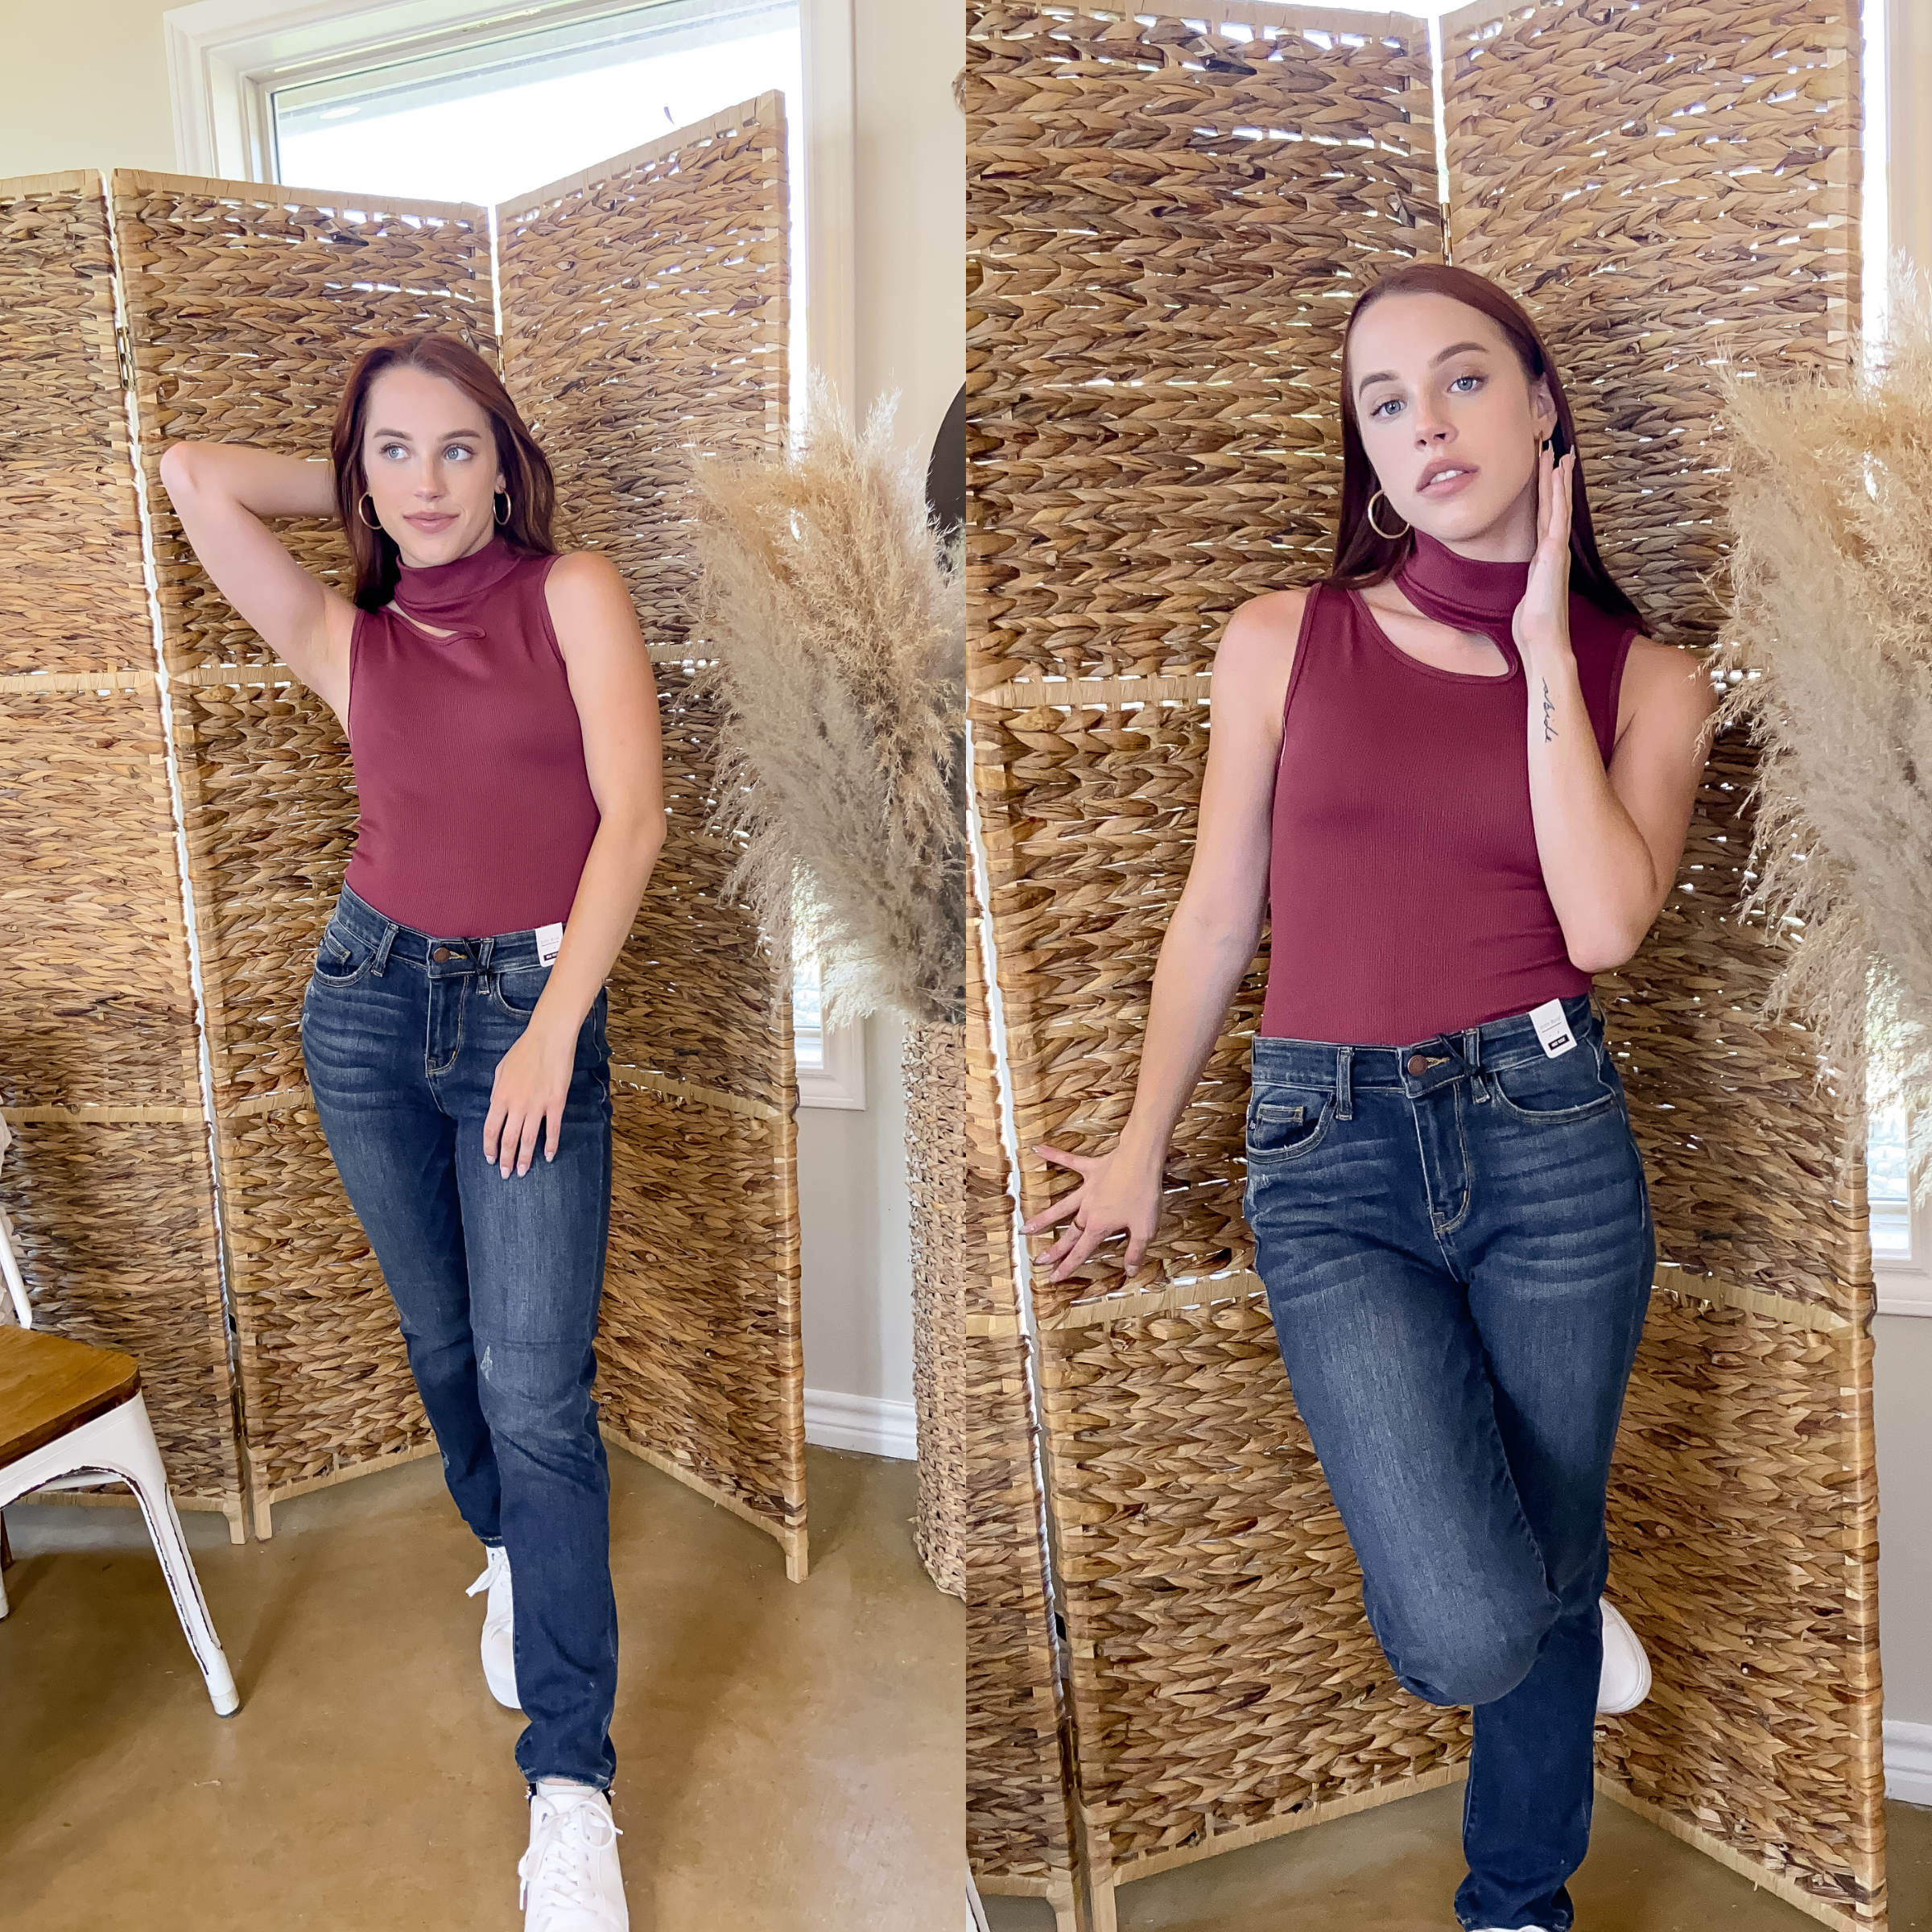 Model is wearing a burgundy, cutout, mock neck ribbed top. She is also wearing  gold hoop earrings, dark wash jeans, and white sneakers.